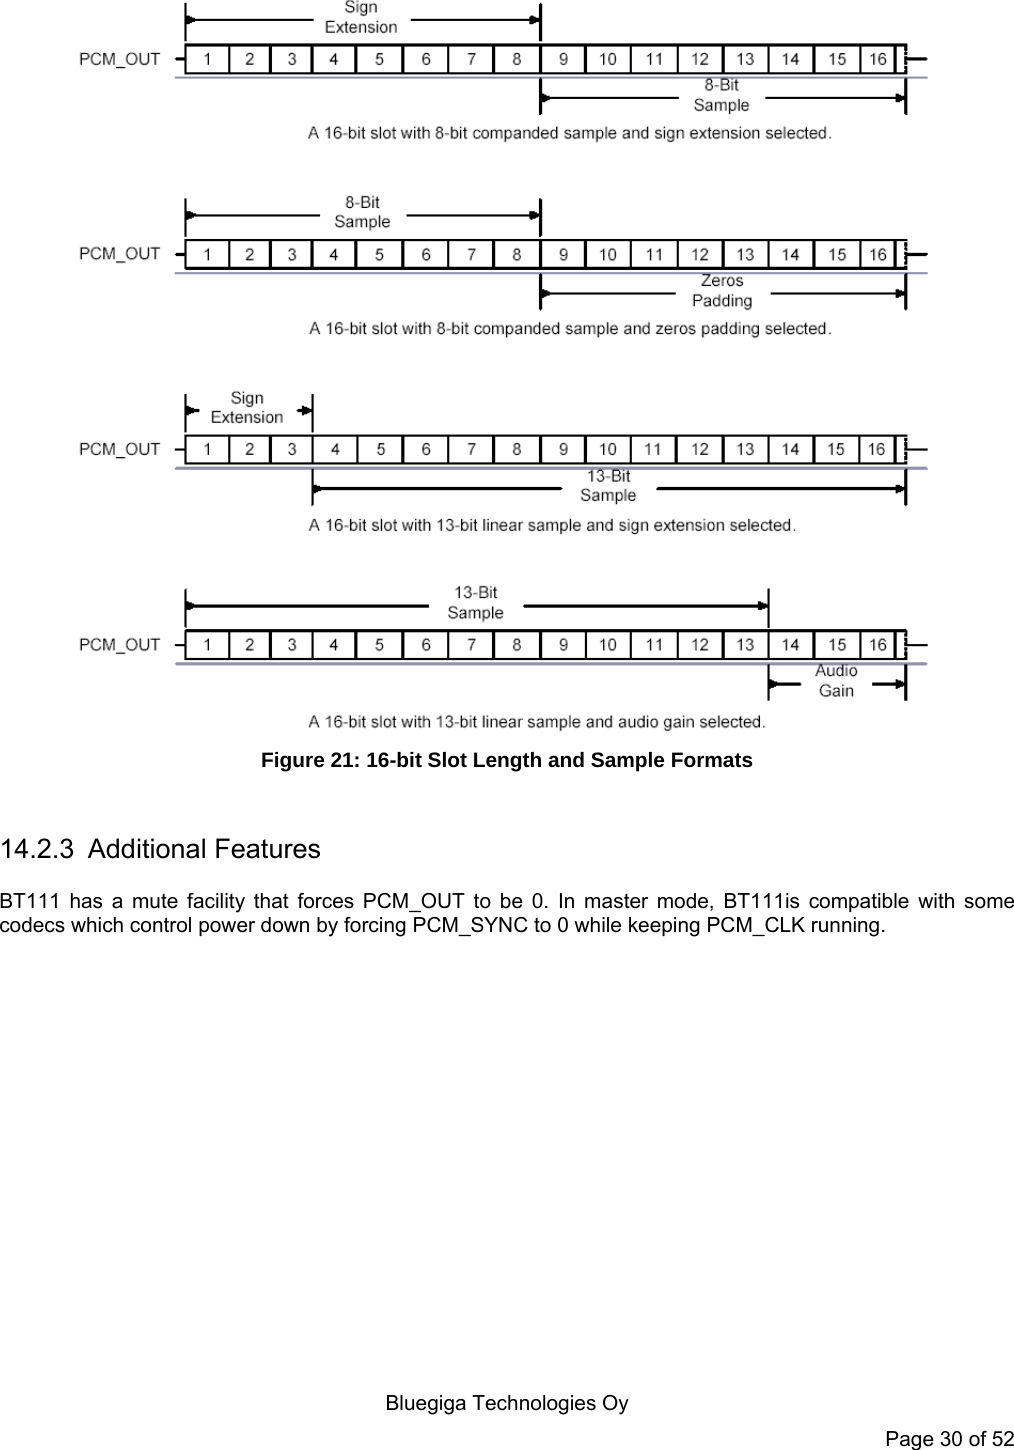    Bluegiga Technologies Oy Page 30 of 52  Figure 21: 16-bit Slot Length and Sample Formats  14.2.3 Additional Features BT111 has a mute facility that forces PCM_OUT to be 0. In master mode, BT111is compatible with some codecs which control power down by forcing PCM_SYNC to 0 while keeping PCM_CLK running.  